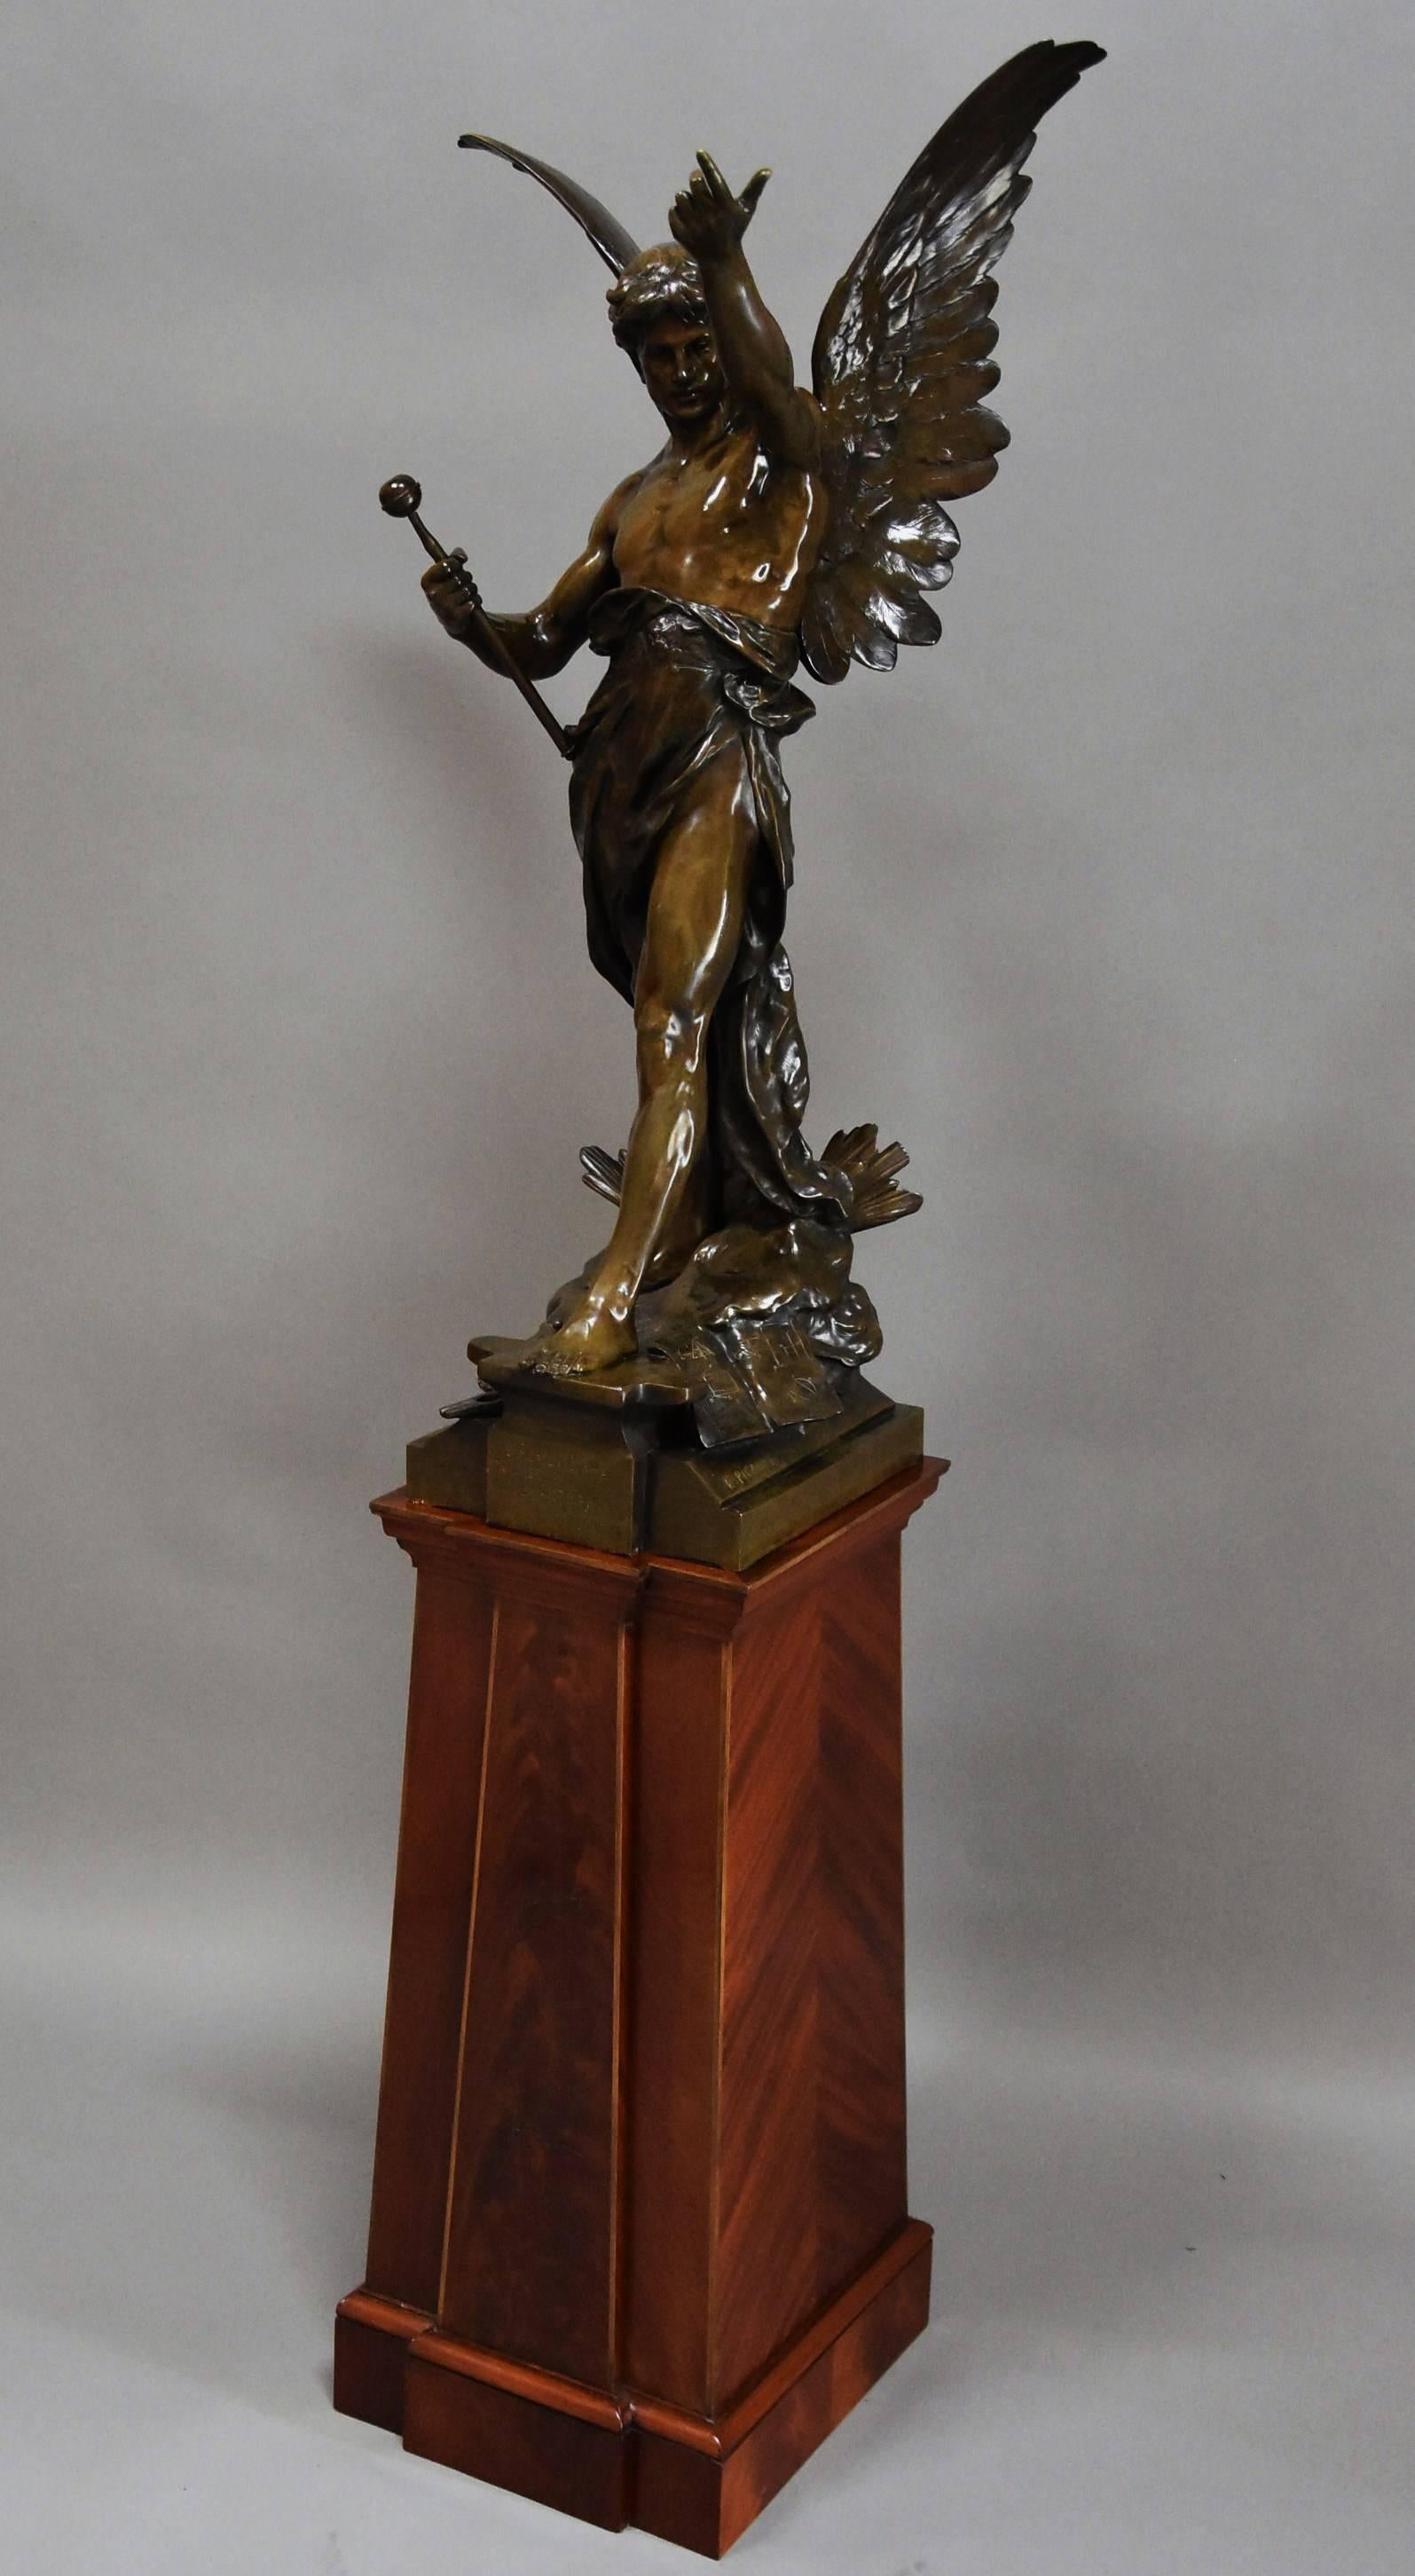 Superb quality large 19th century French bronze 'Le Genie du Travail' by Emile Picault (1833-1915) with fine patination supported on a mahogany pedestal.

This superb and imposing bronze 'Le Genie du Travail' translates as 'The Genius of